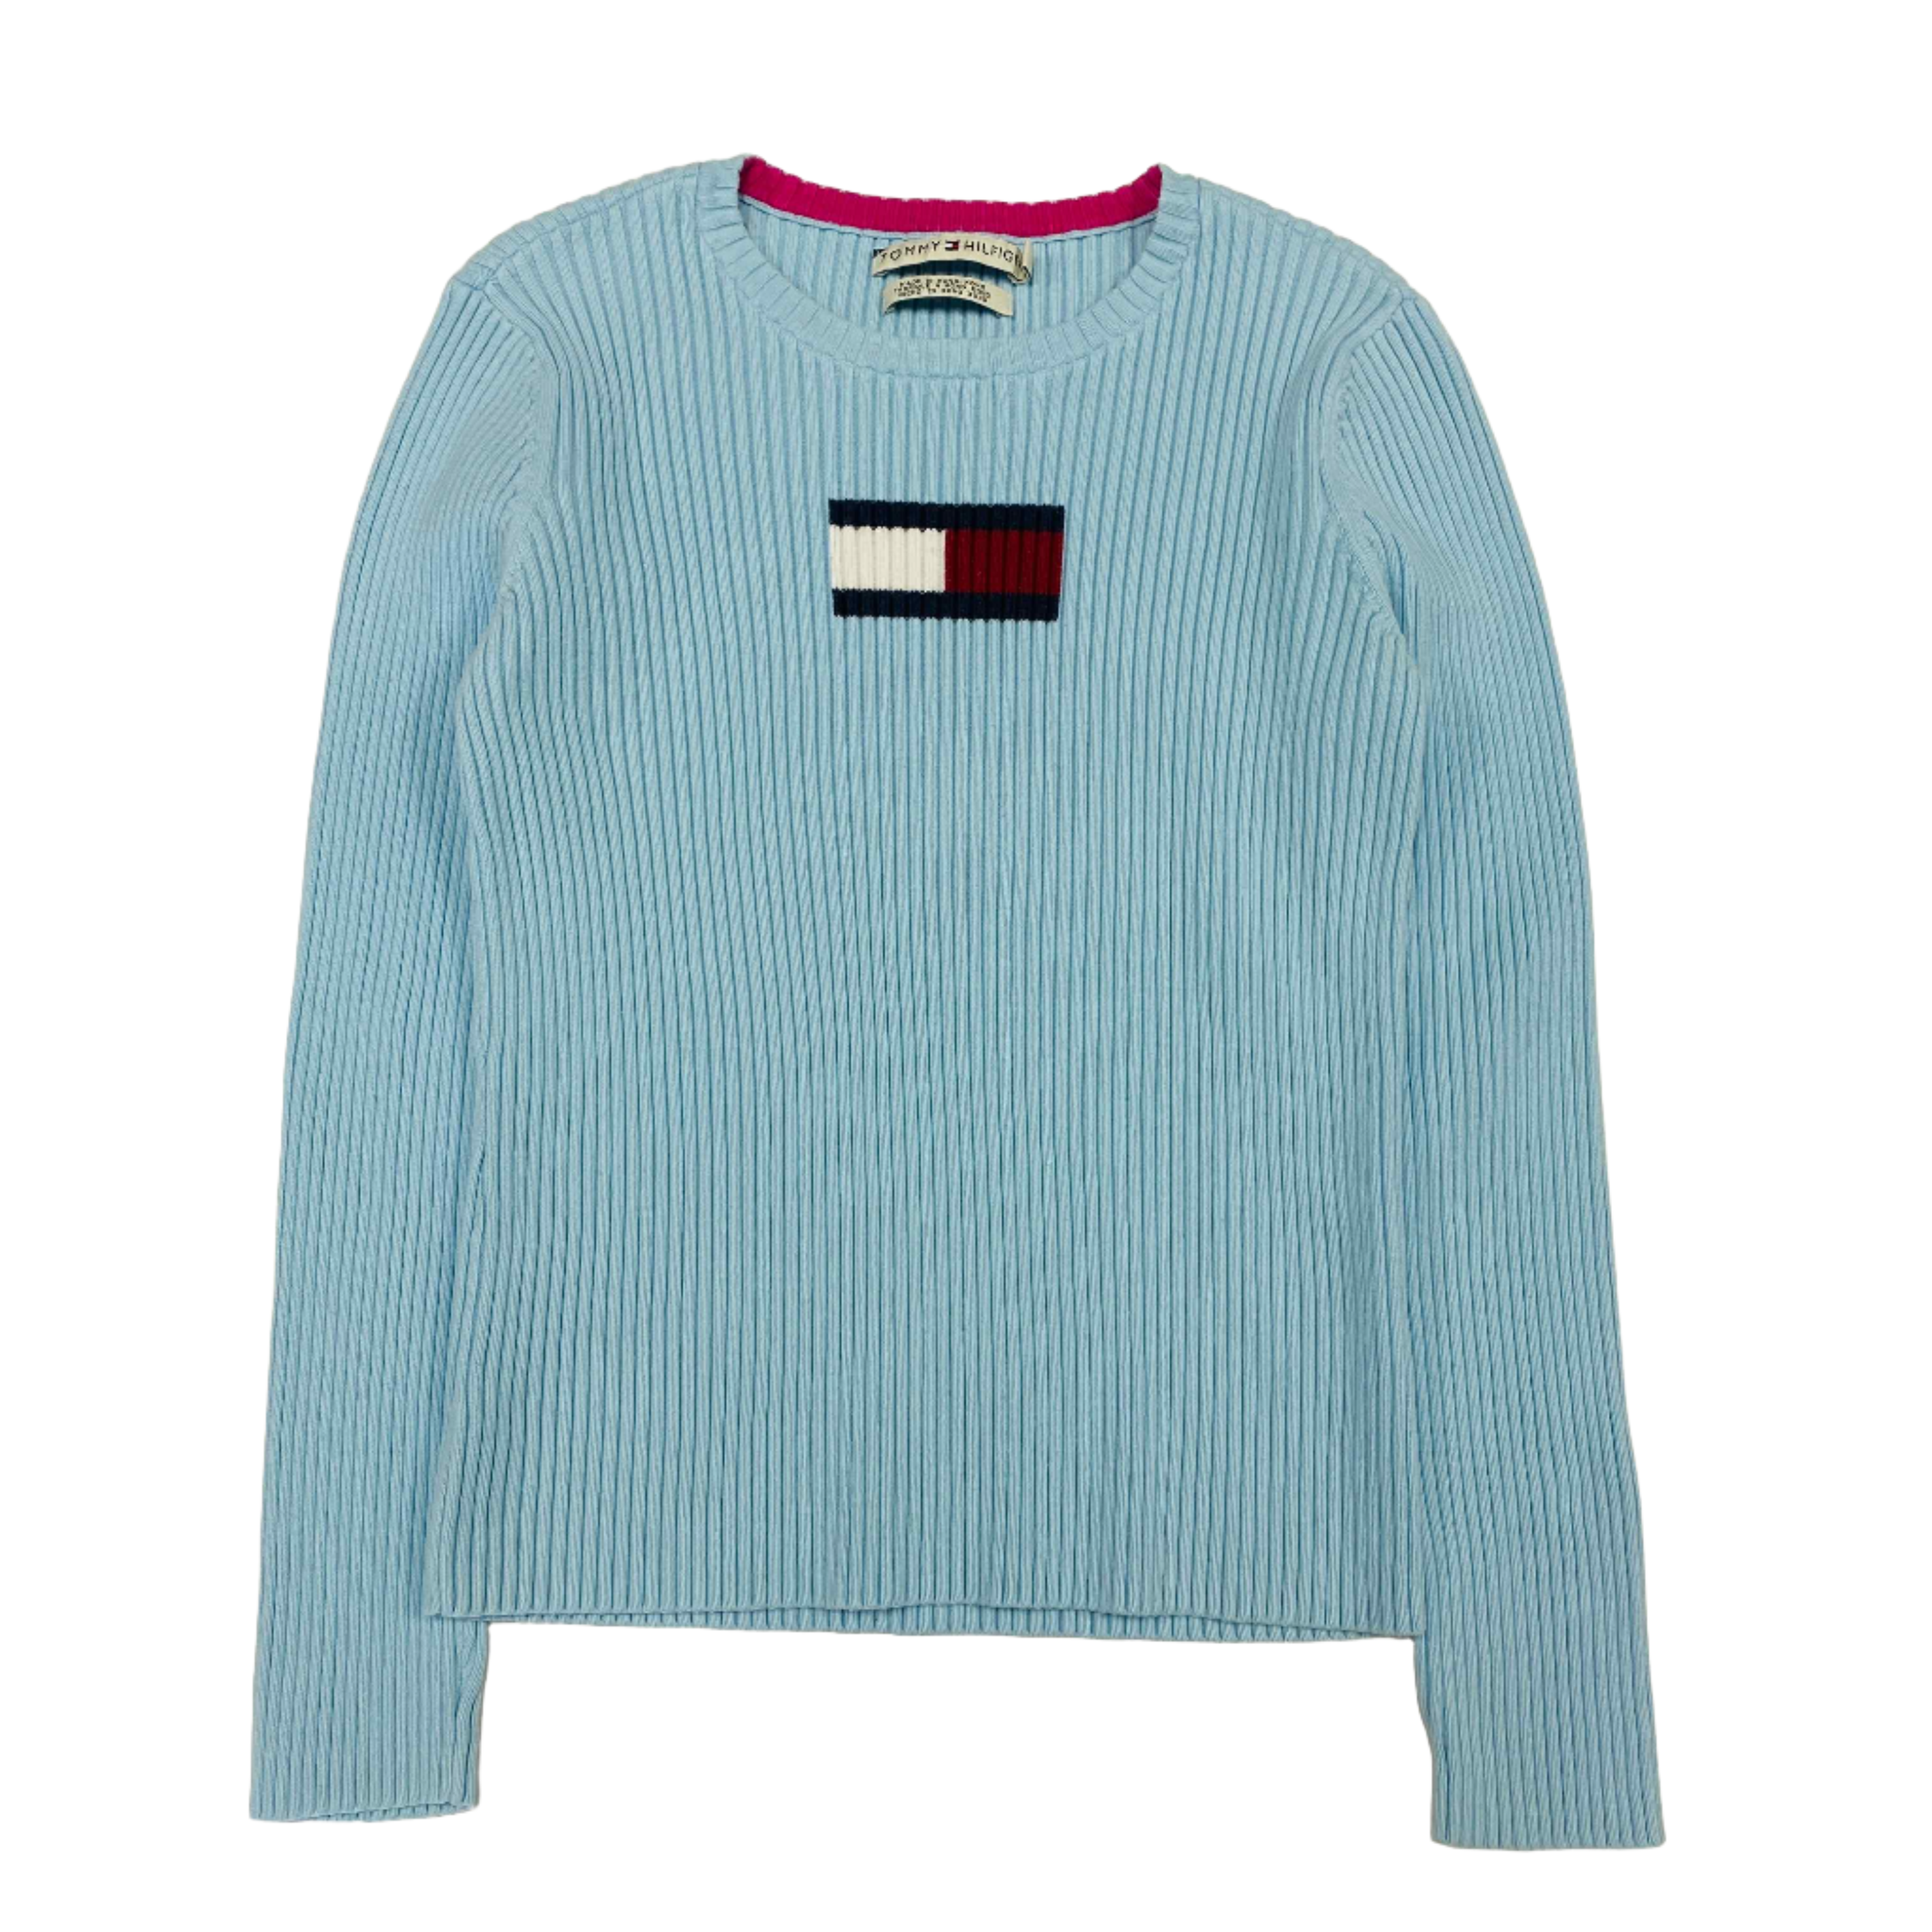 Tommy Hilfiger Knitted Jumper - XS